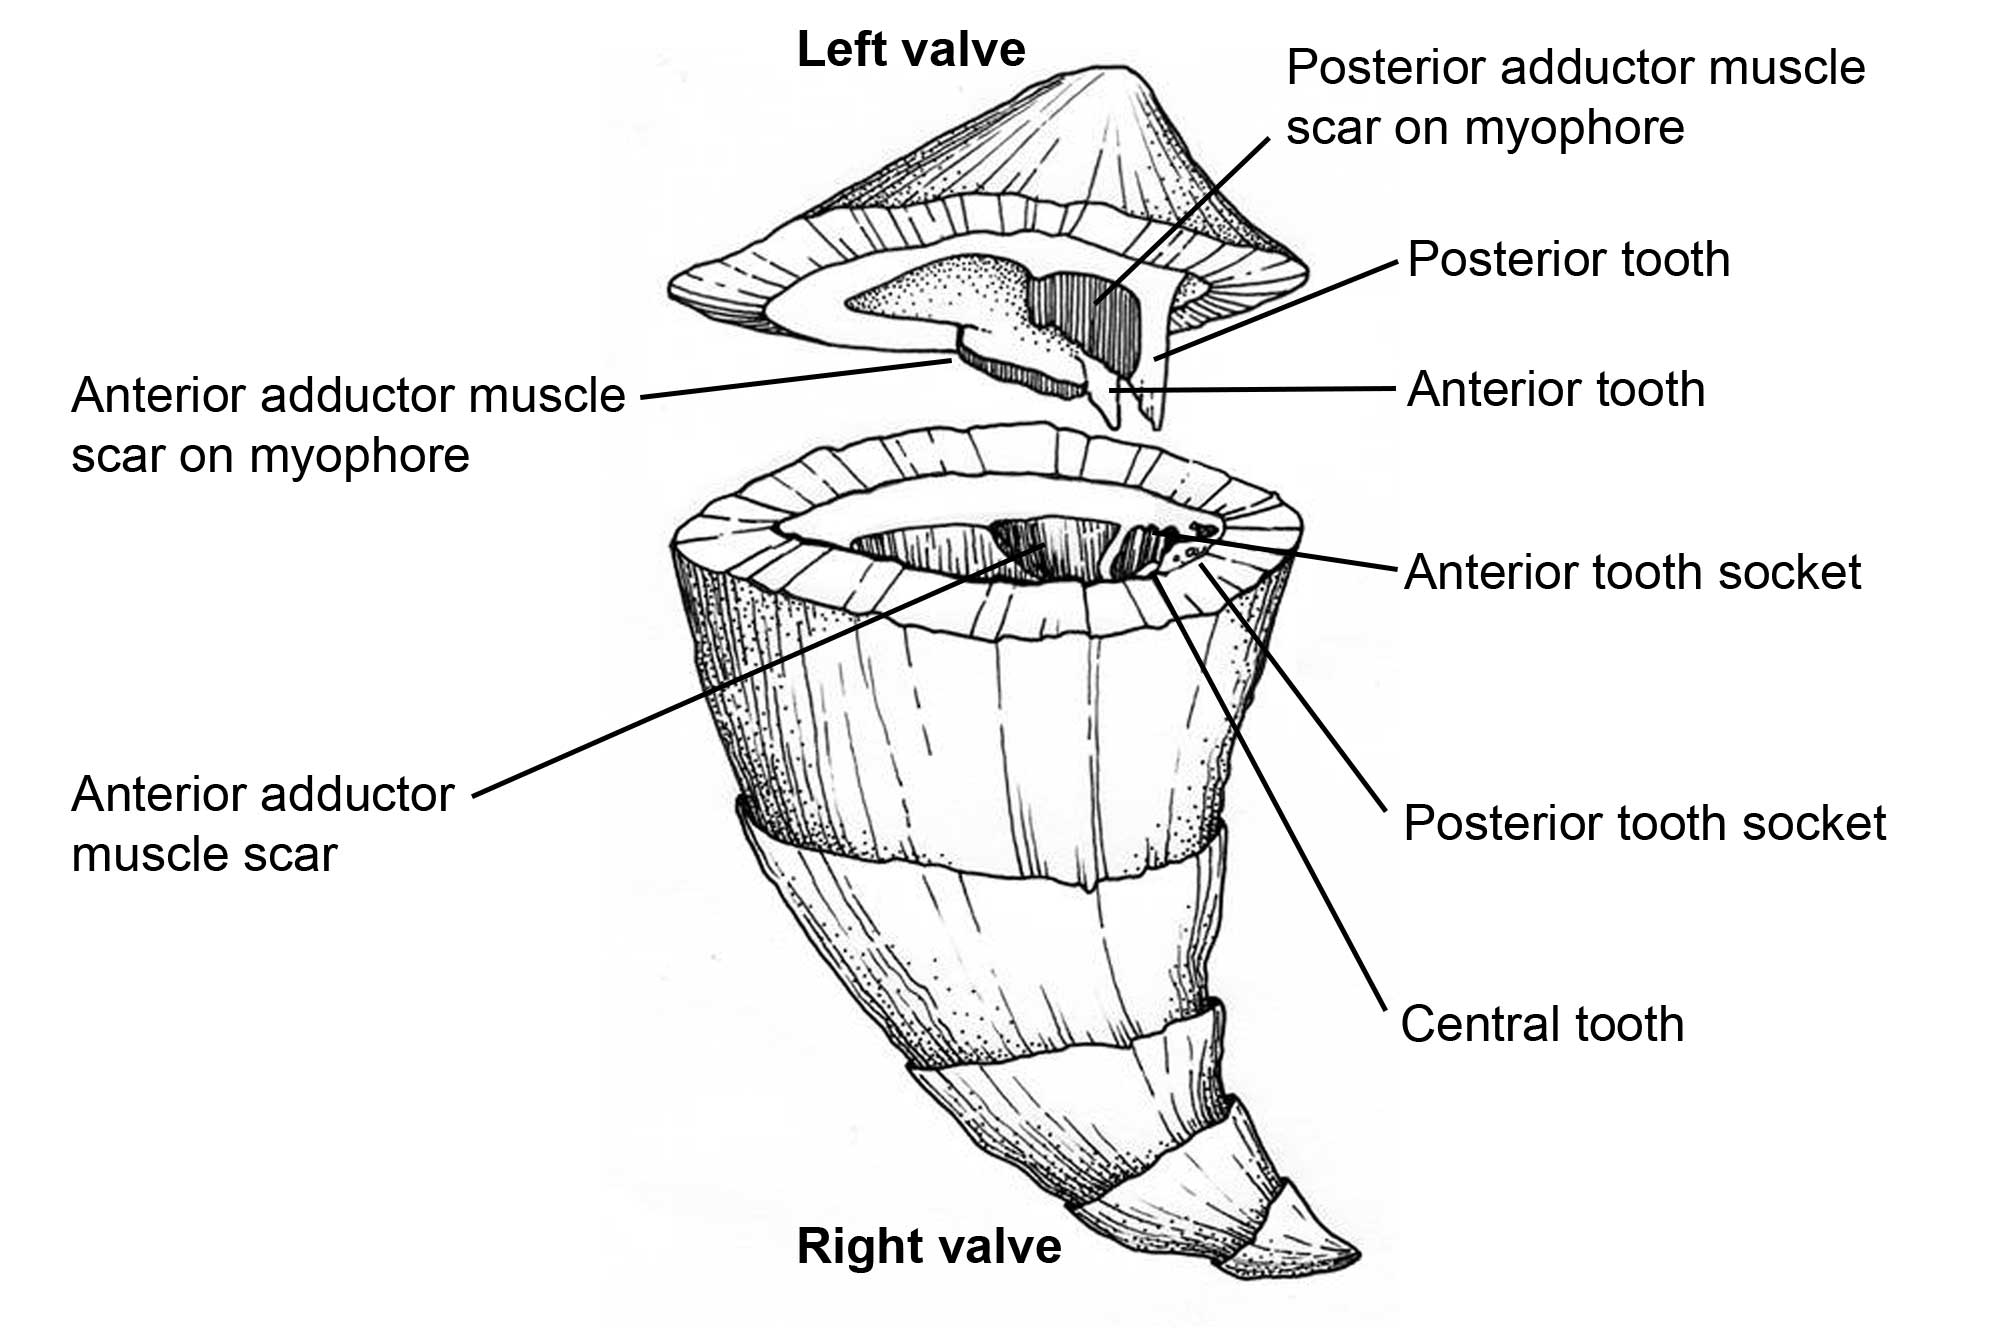 Illustration showing the parts of a rudist shell.